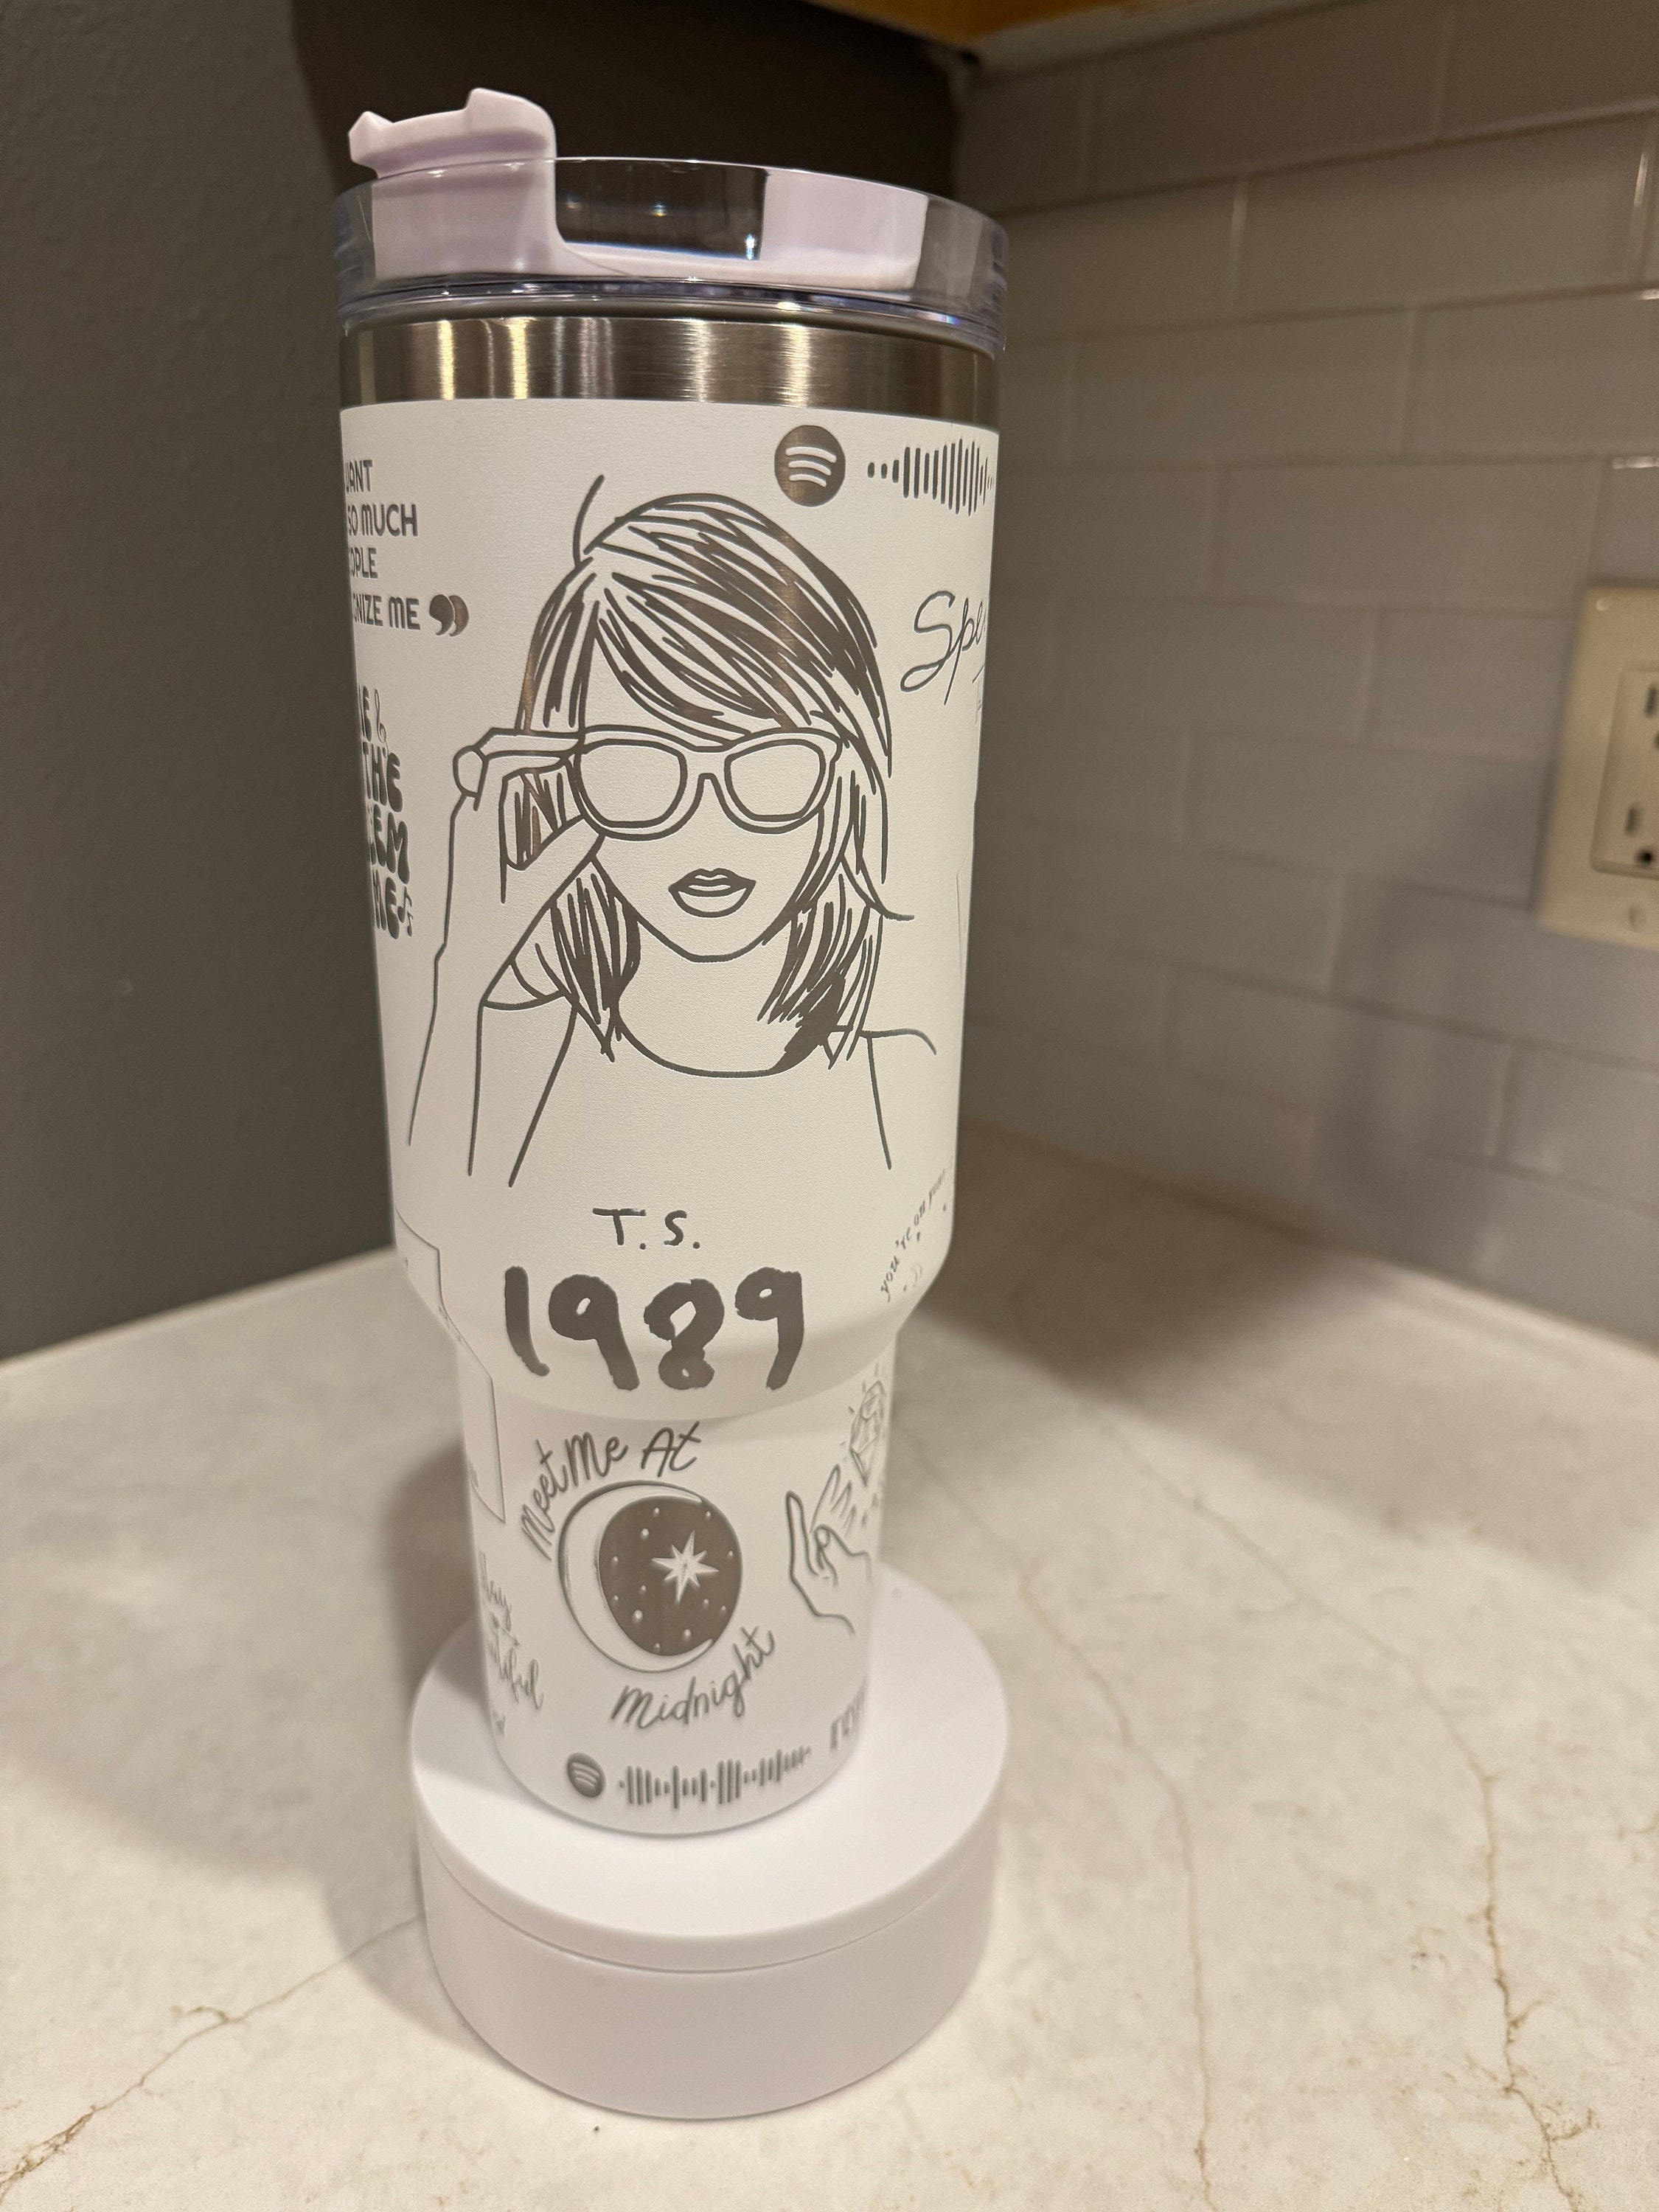 Taylor Swift Stanley Cup 40 Oz Stanley Tumbler With Handle Gift For Swiftie  Red 1989 Lover Folklore Fearless Reputation Taylors Version 2023 The Eras  Tour Travel Cups - Laughinks